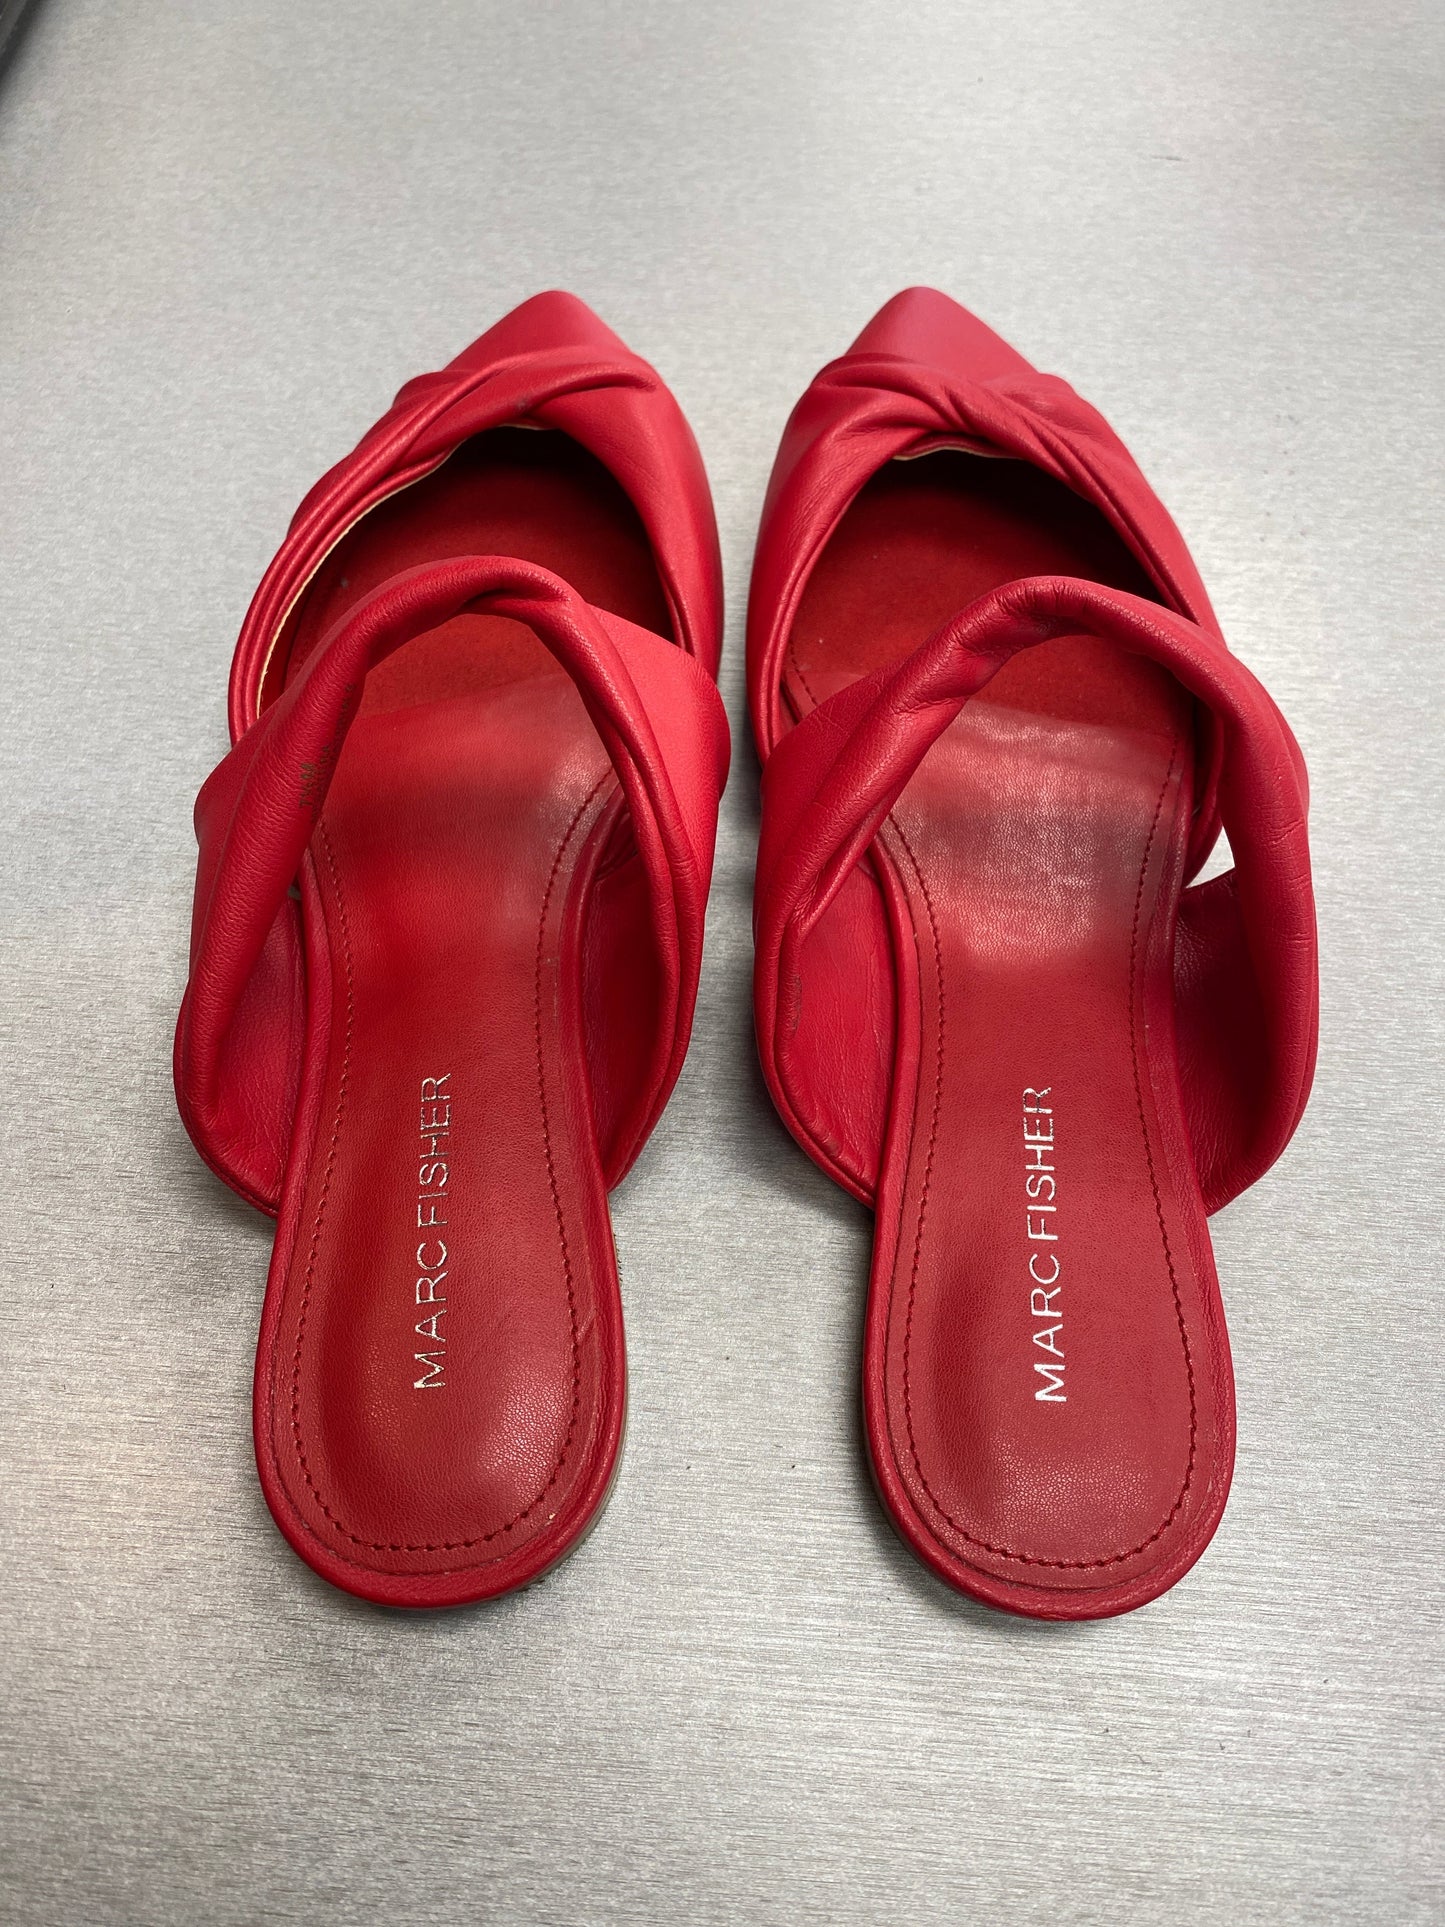 Shoes Flats Mule & Slide By Marc Fisher  Size: 7.5